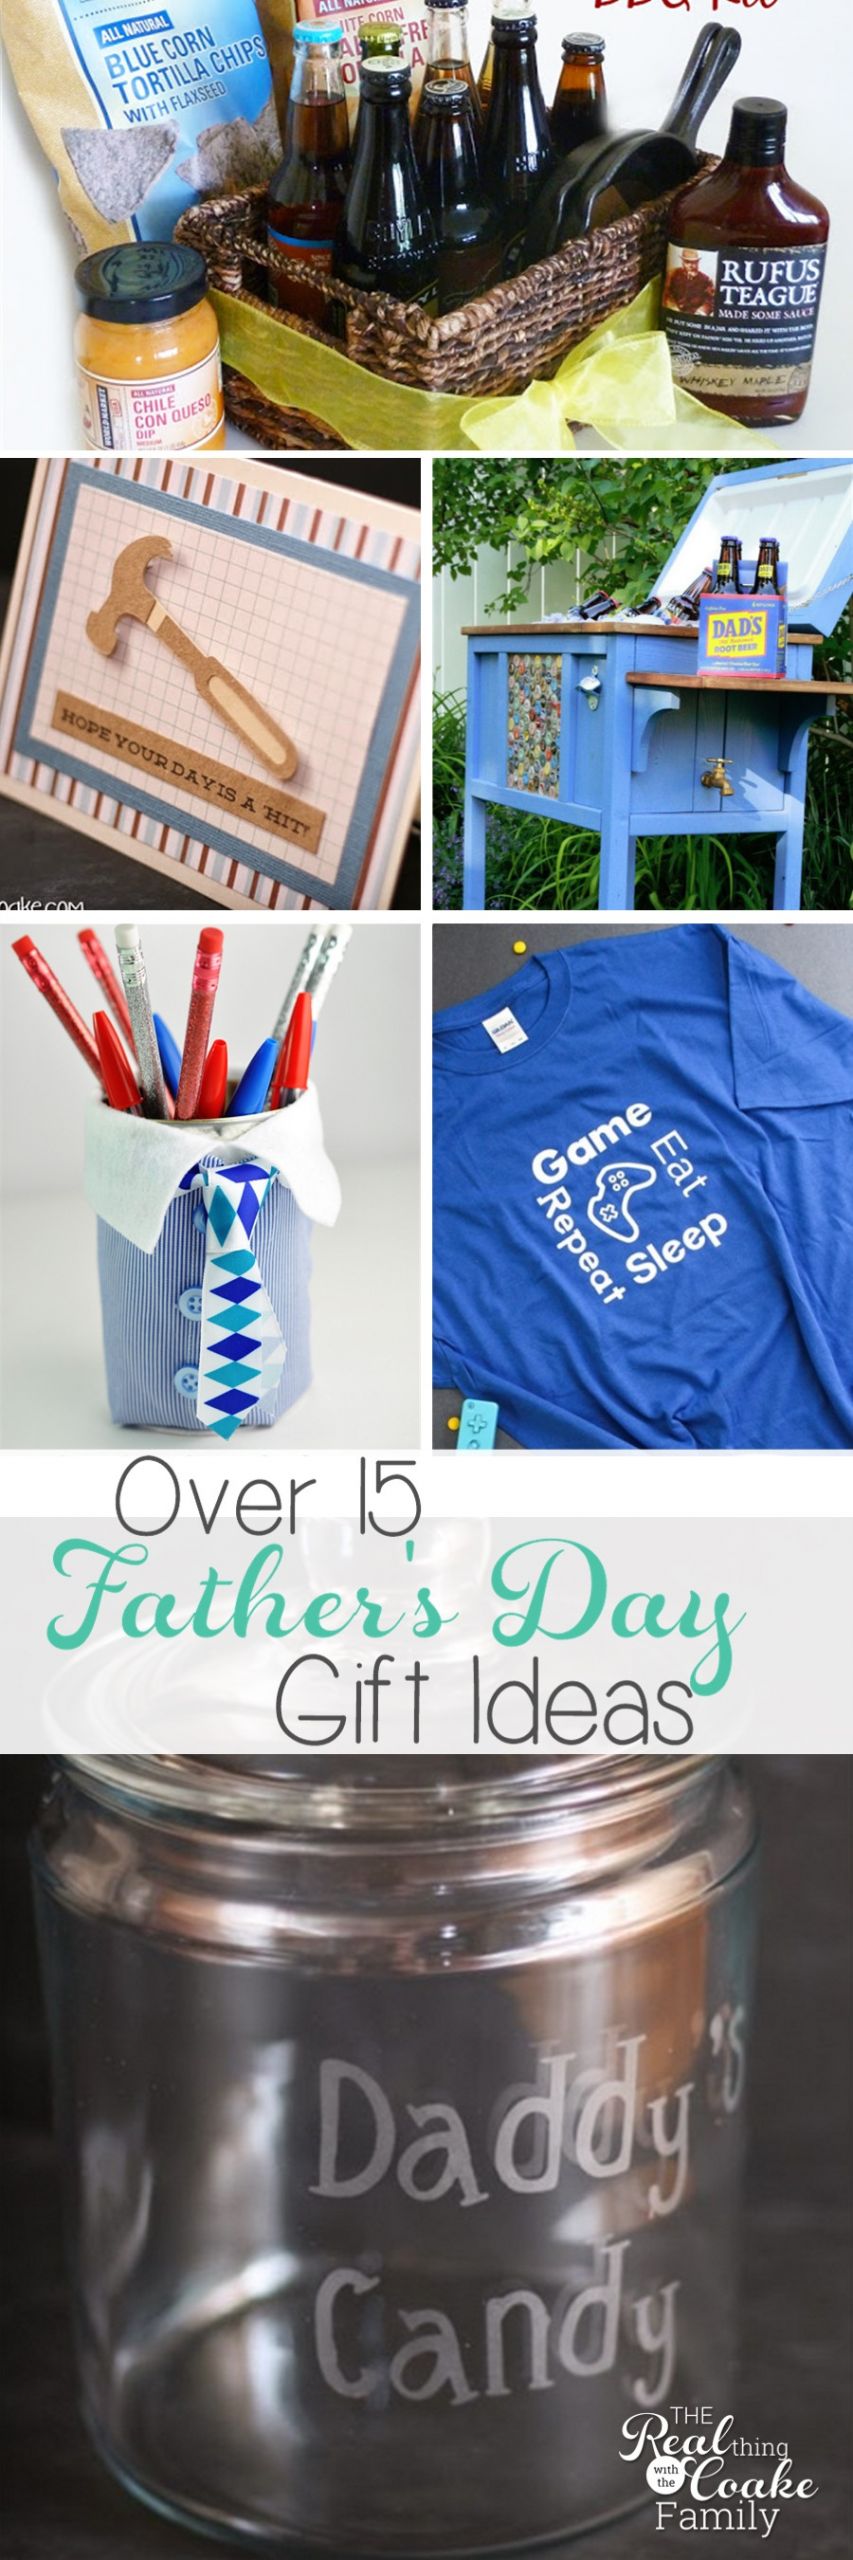 Great Fathers Day Gifts
 Over 15 Great Father’s Day Gift Ideas The Real Thing